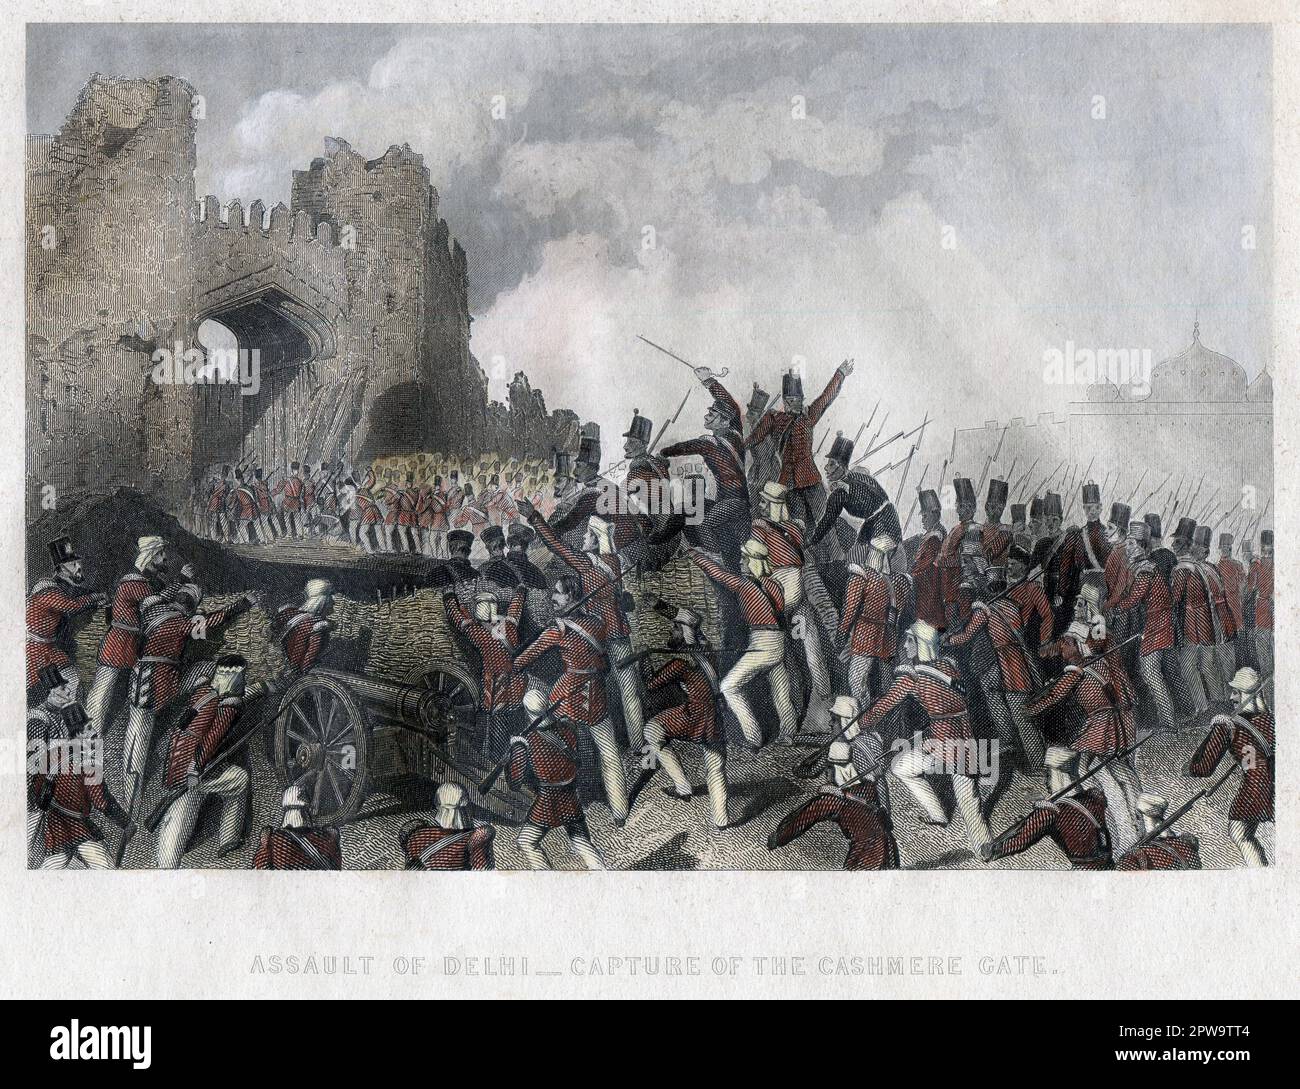 India. 1857. A hand-tinted antique engraving entitled, “Assault of Delhi - Capture of the Cashmere Gate”. Depicts the British Army’s attack on the Cashmere Gate during the Indian Rebellion. Stock Photo